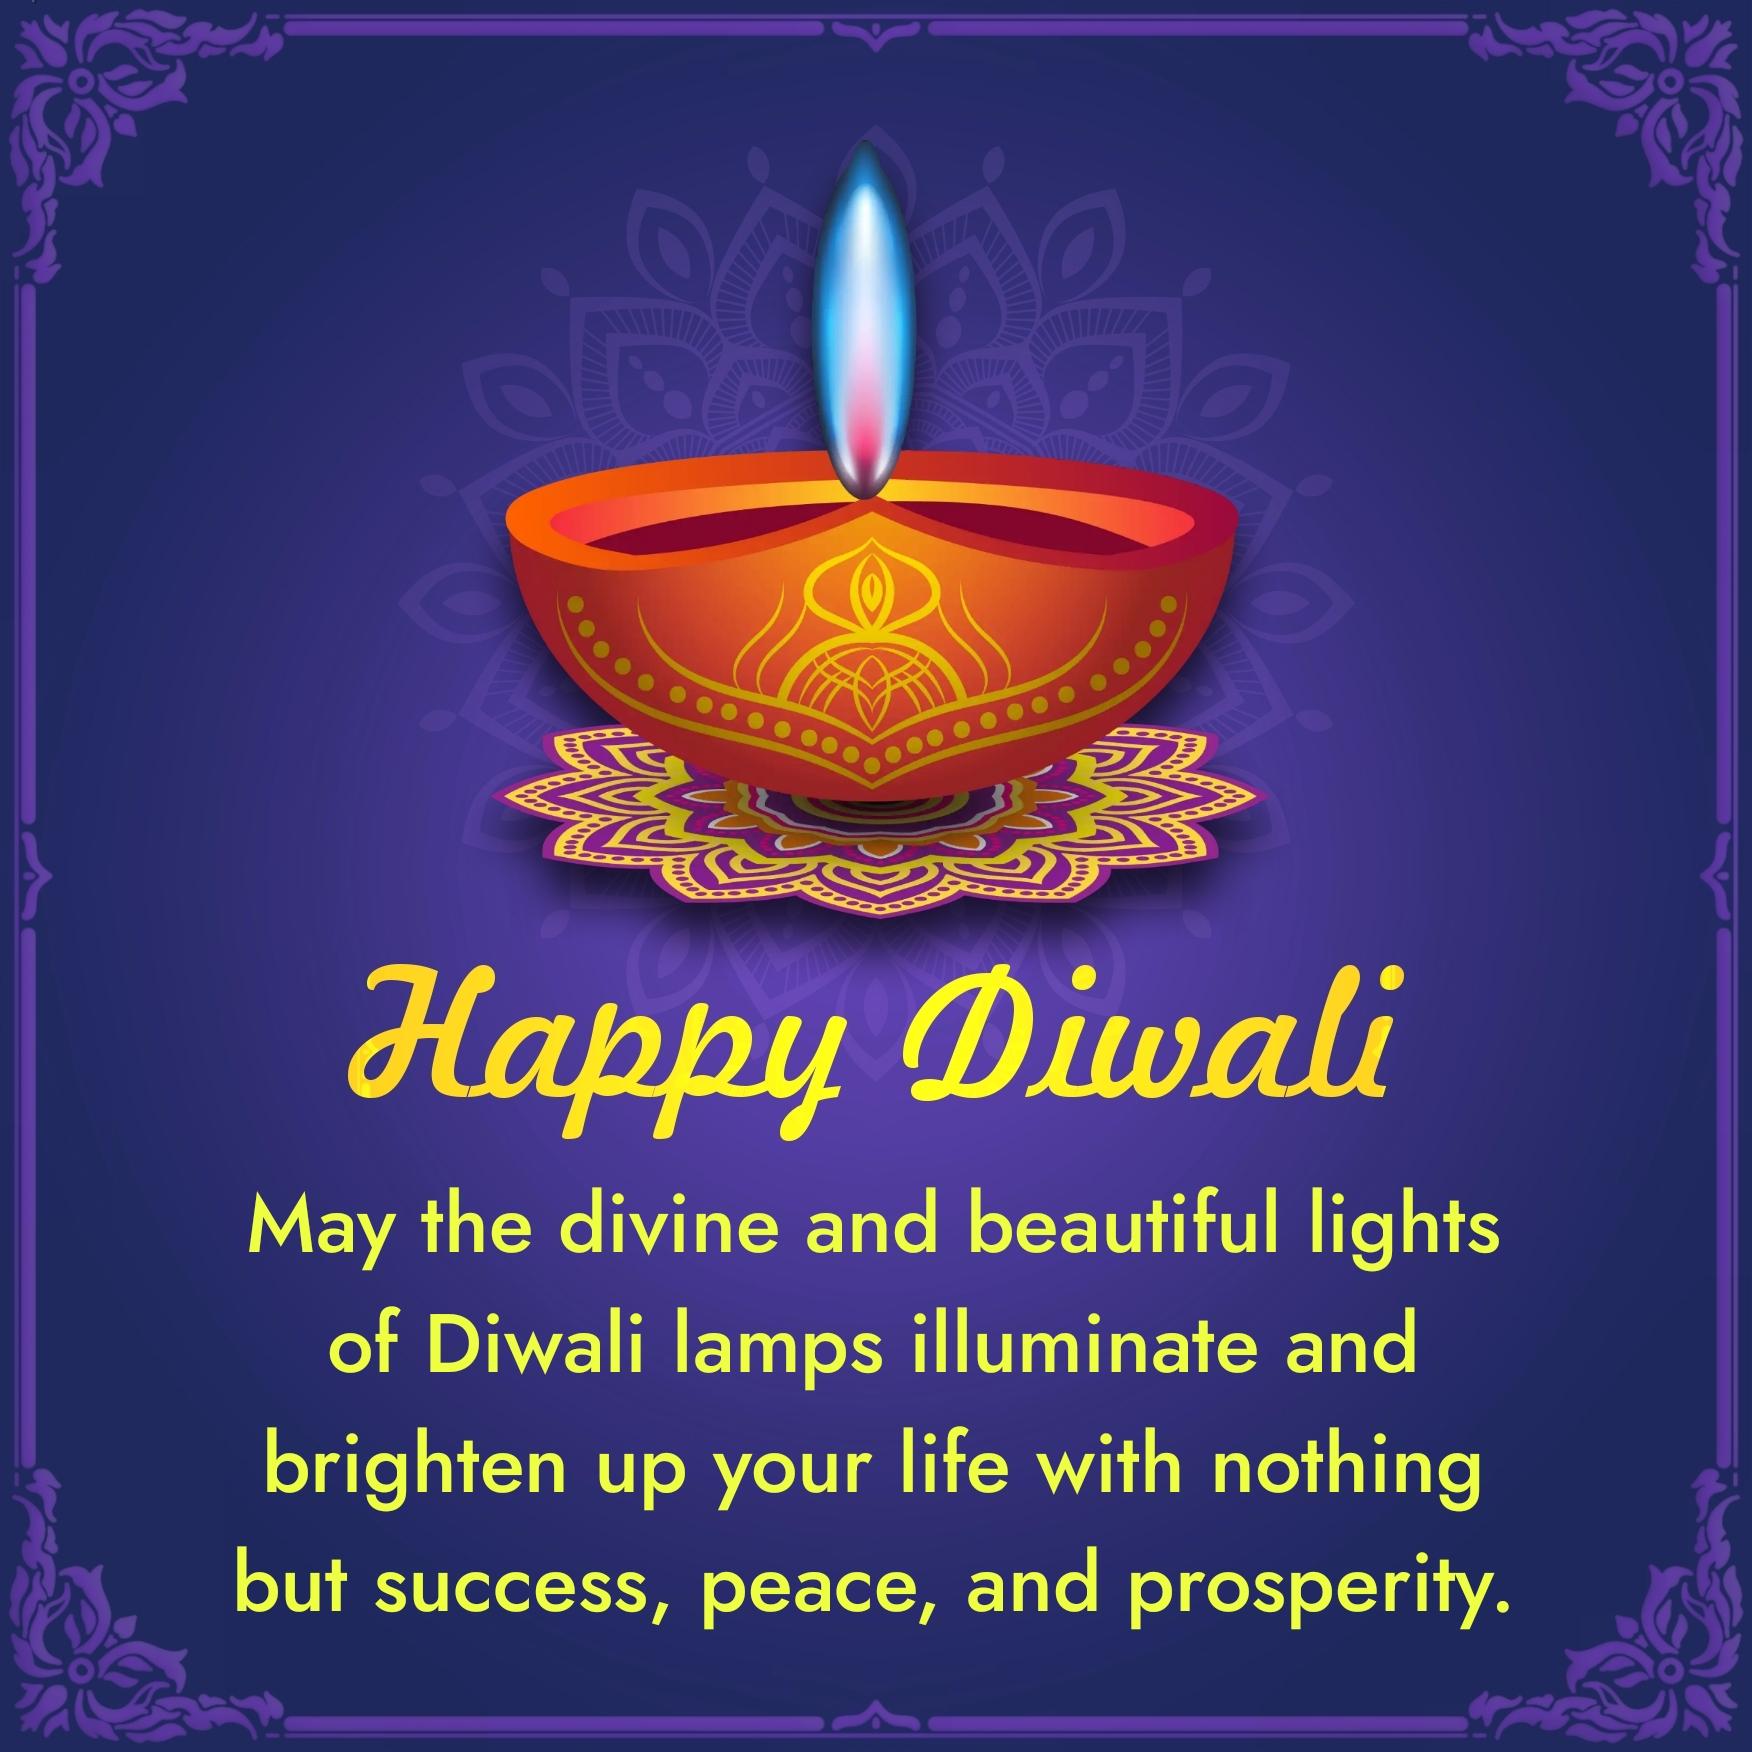 May the divine and beautiful lights of Diwali lamps